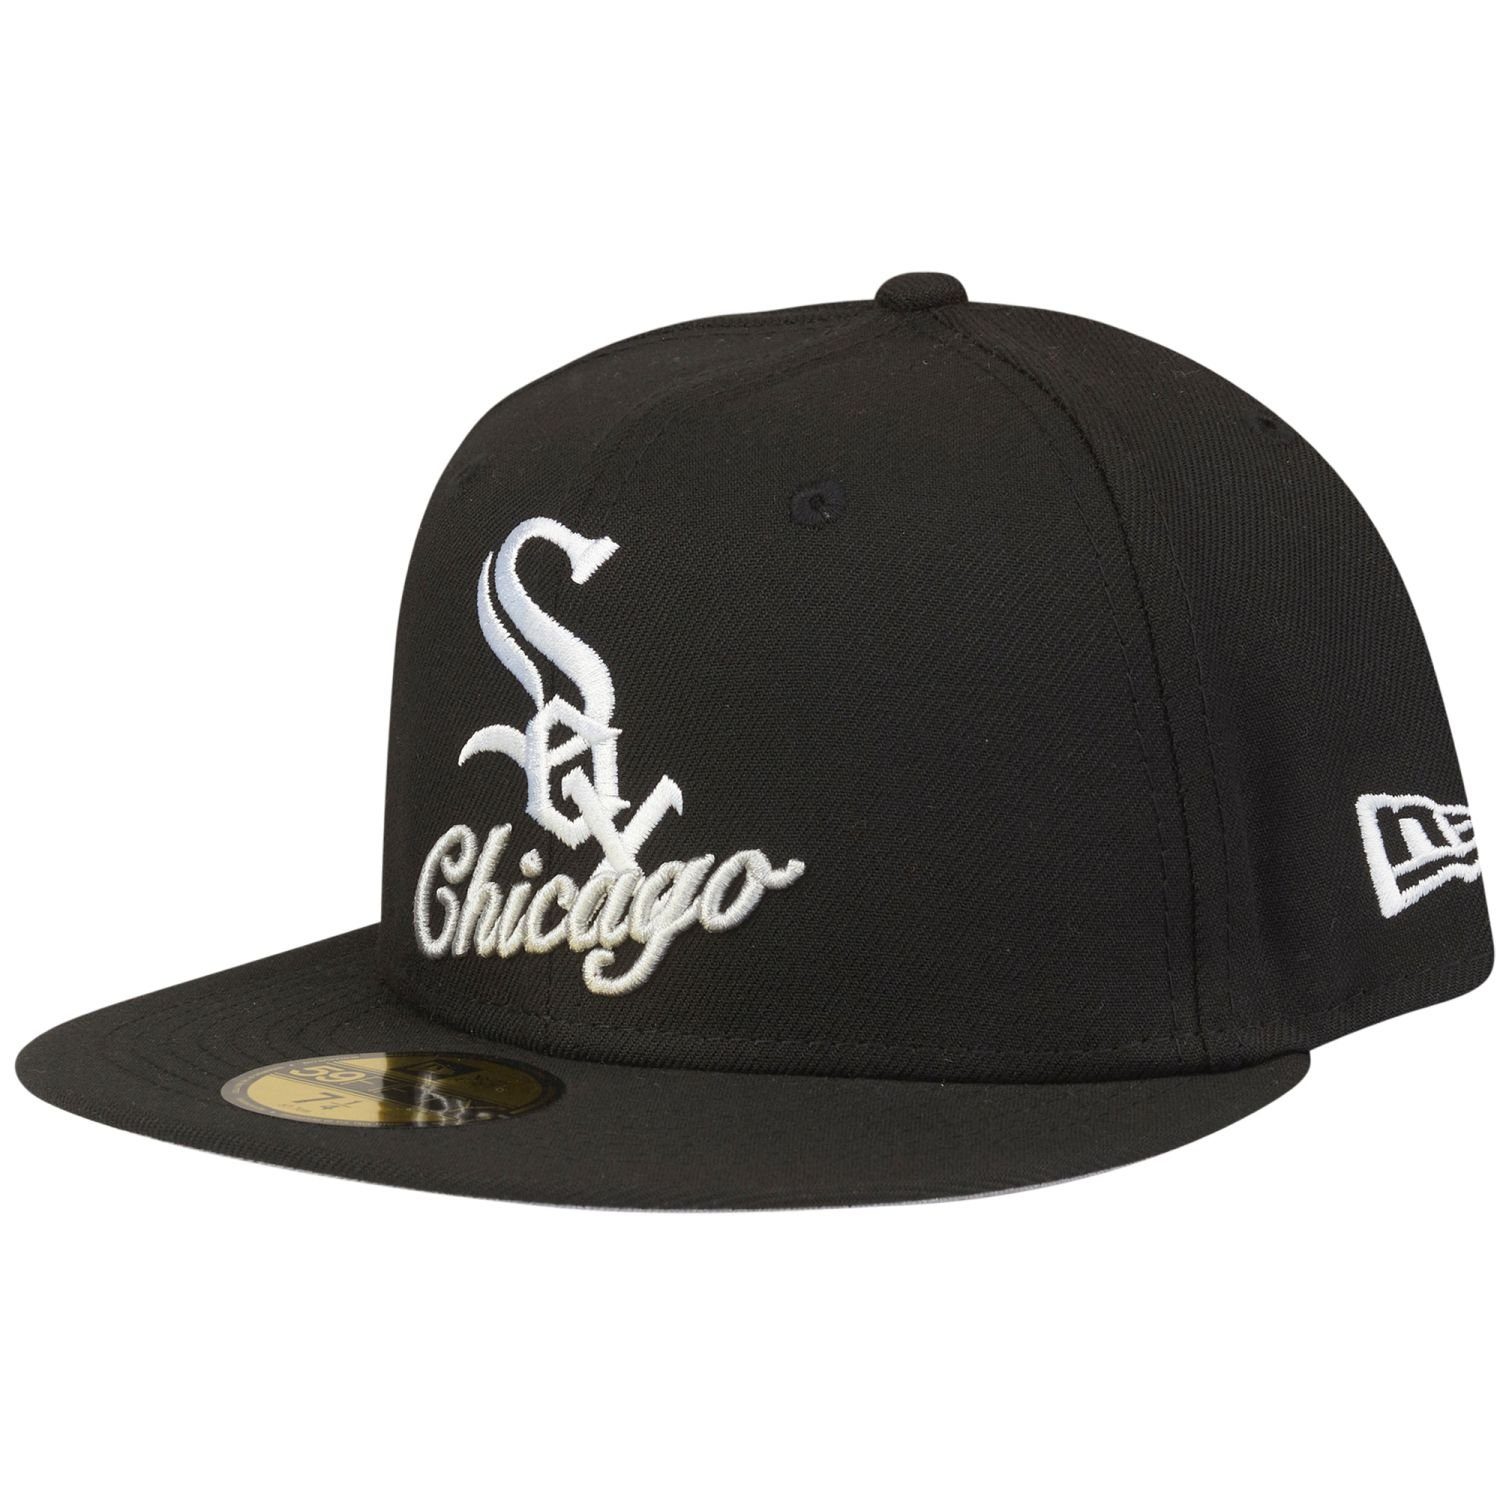 New Era Fitted Cap 59Fifty DUAL LOGO Chicago White Sox